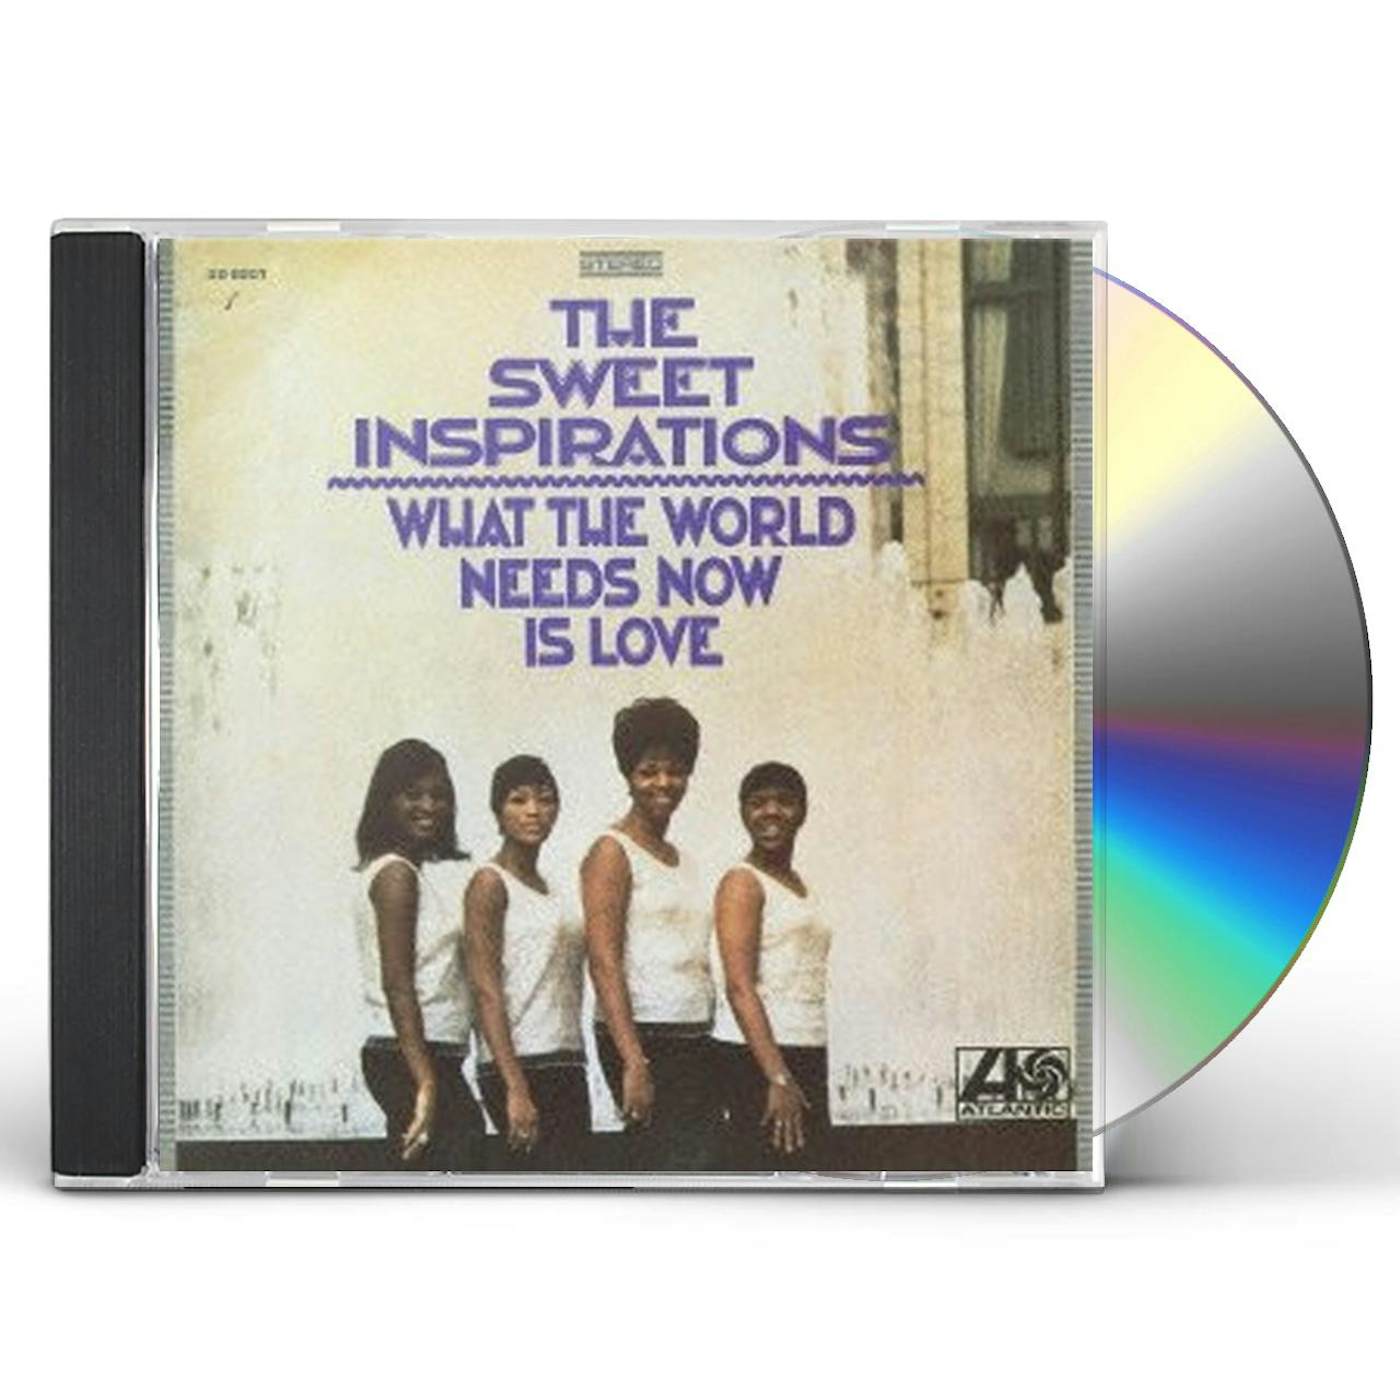 The Sweet Inspirations WHAT THE WORLD NEEDS NOW CD